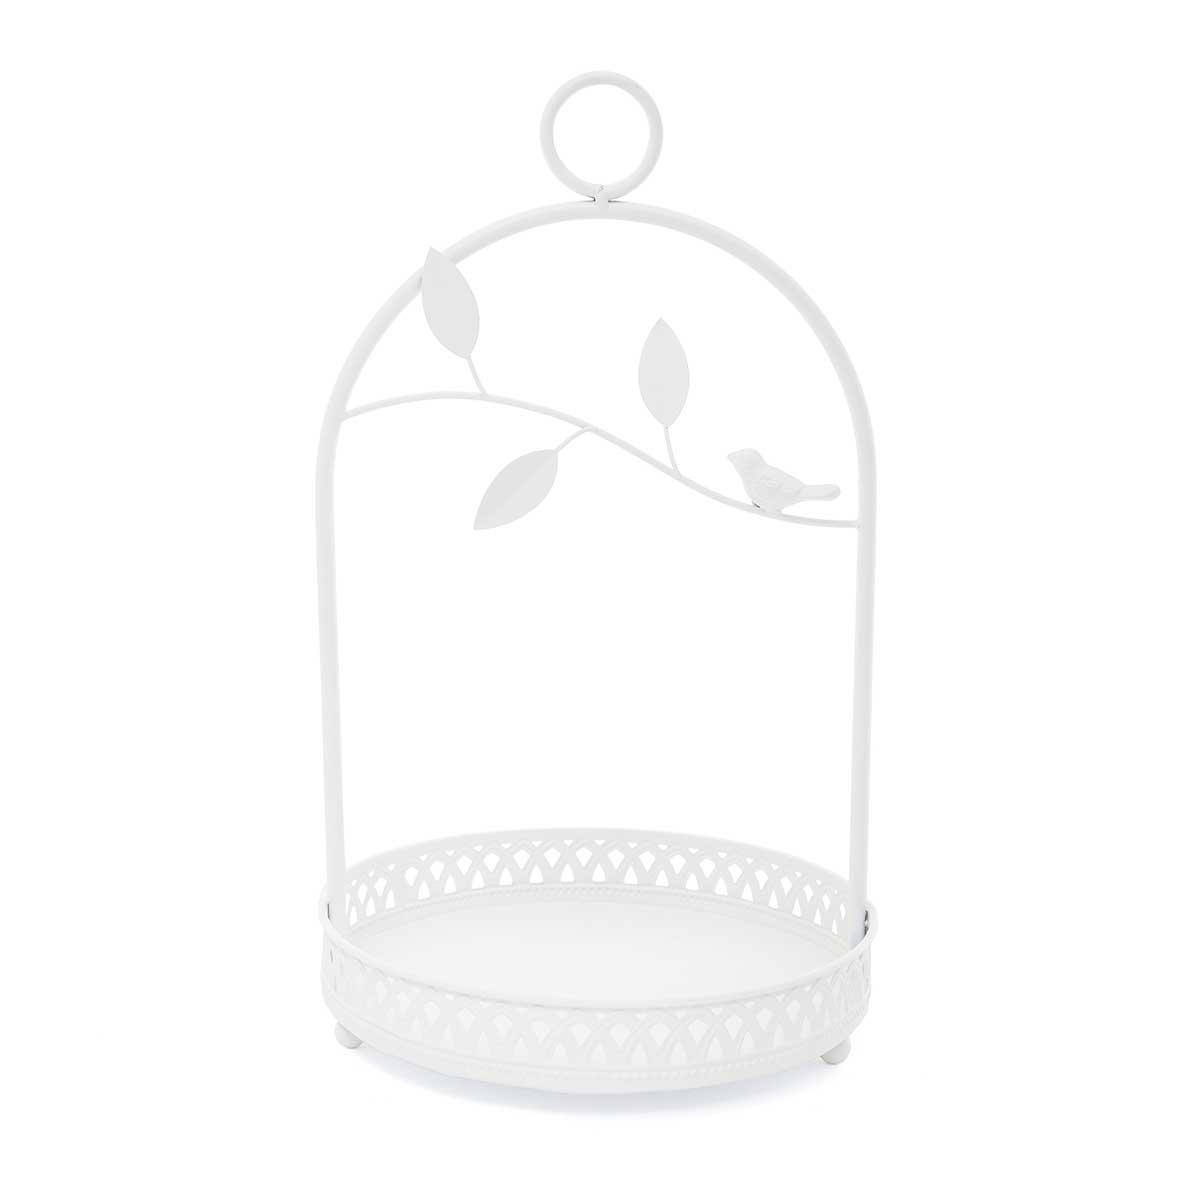 TABLE TRAY BIRD/LEAF SMALL 10IN X 17IN MATTE WHITE METAL - Click Image to Close